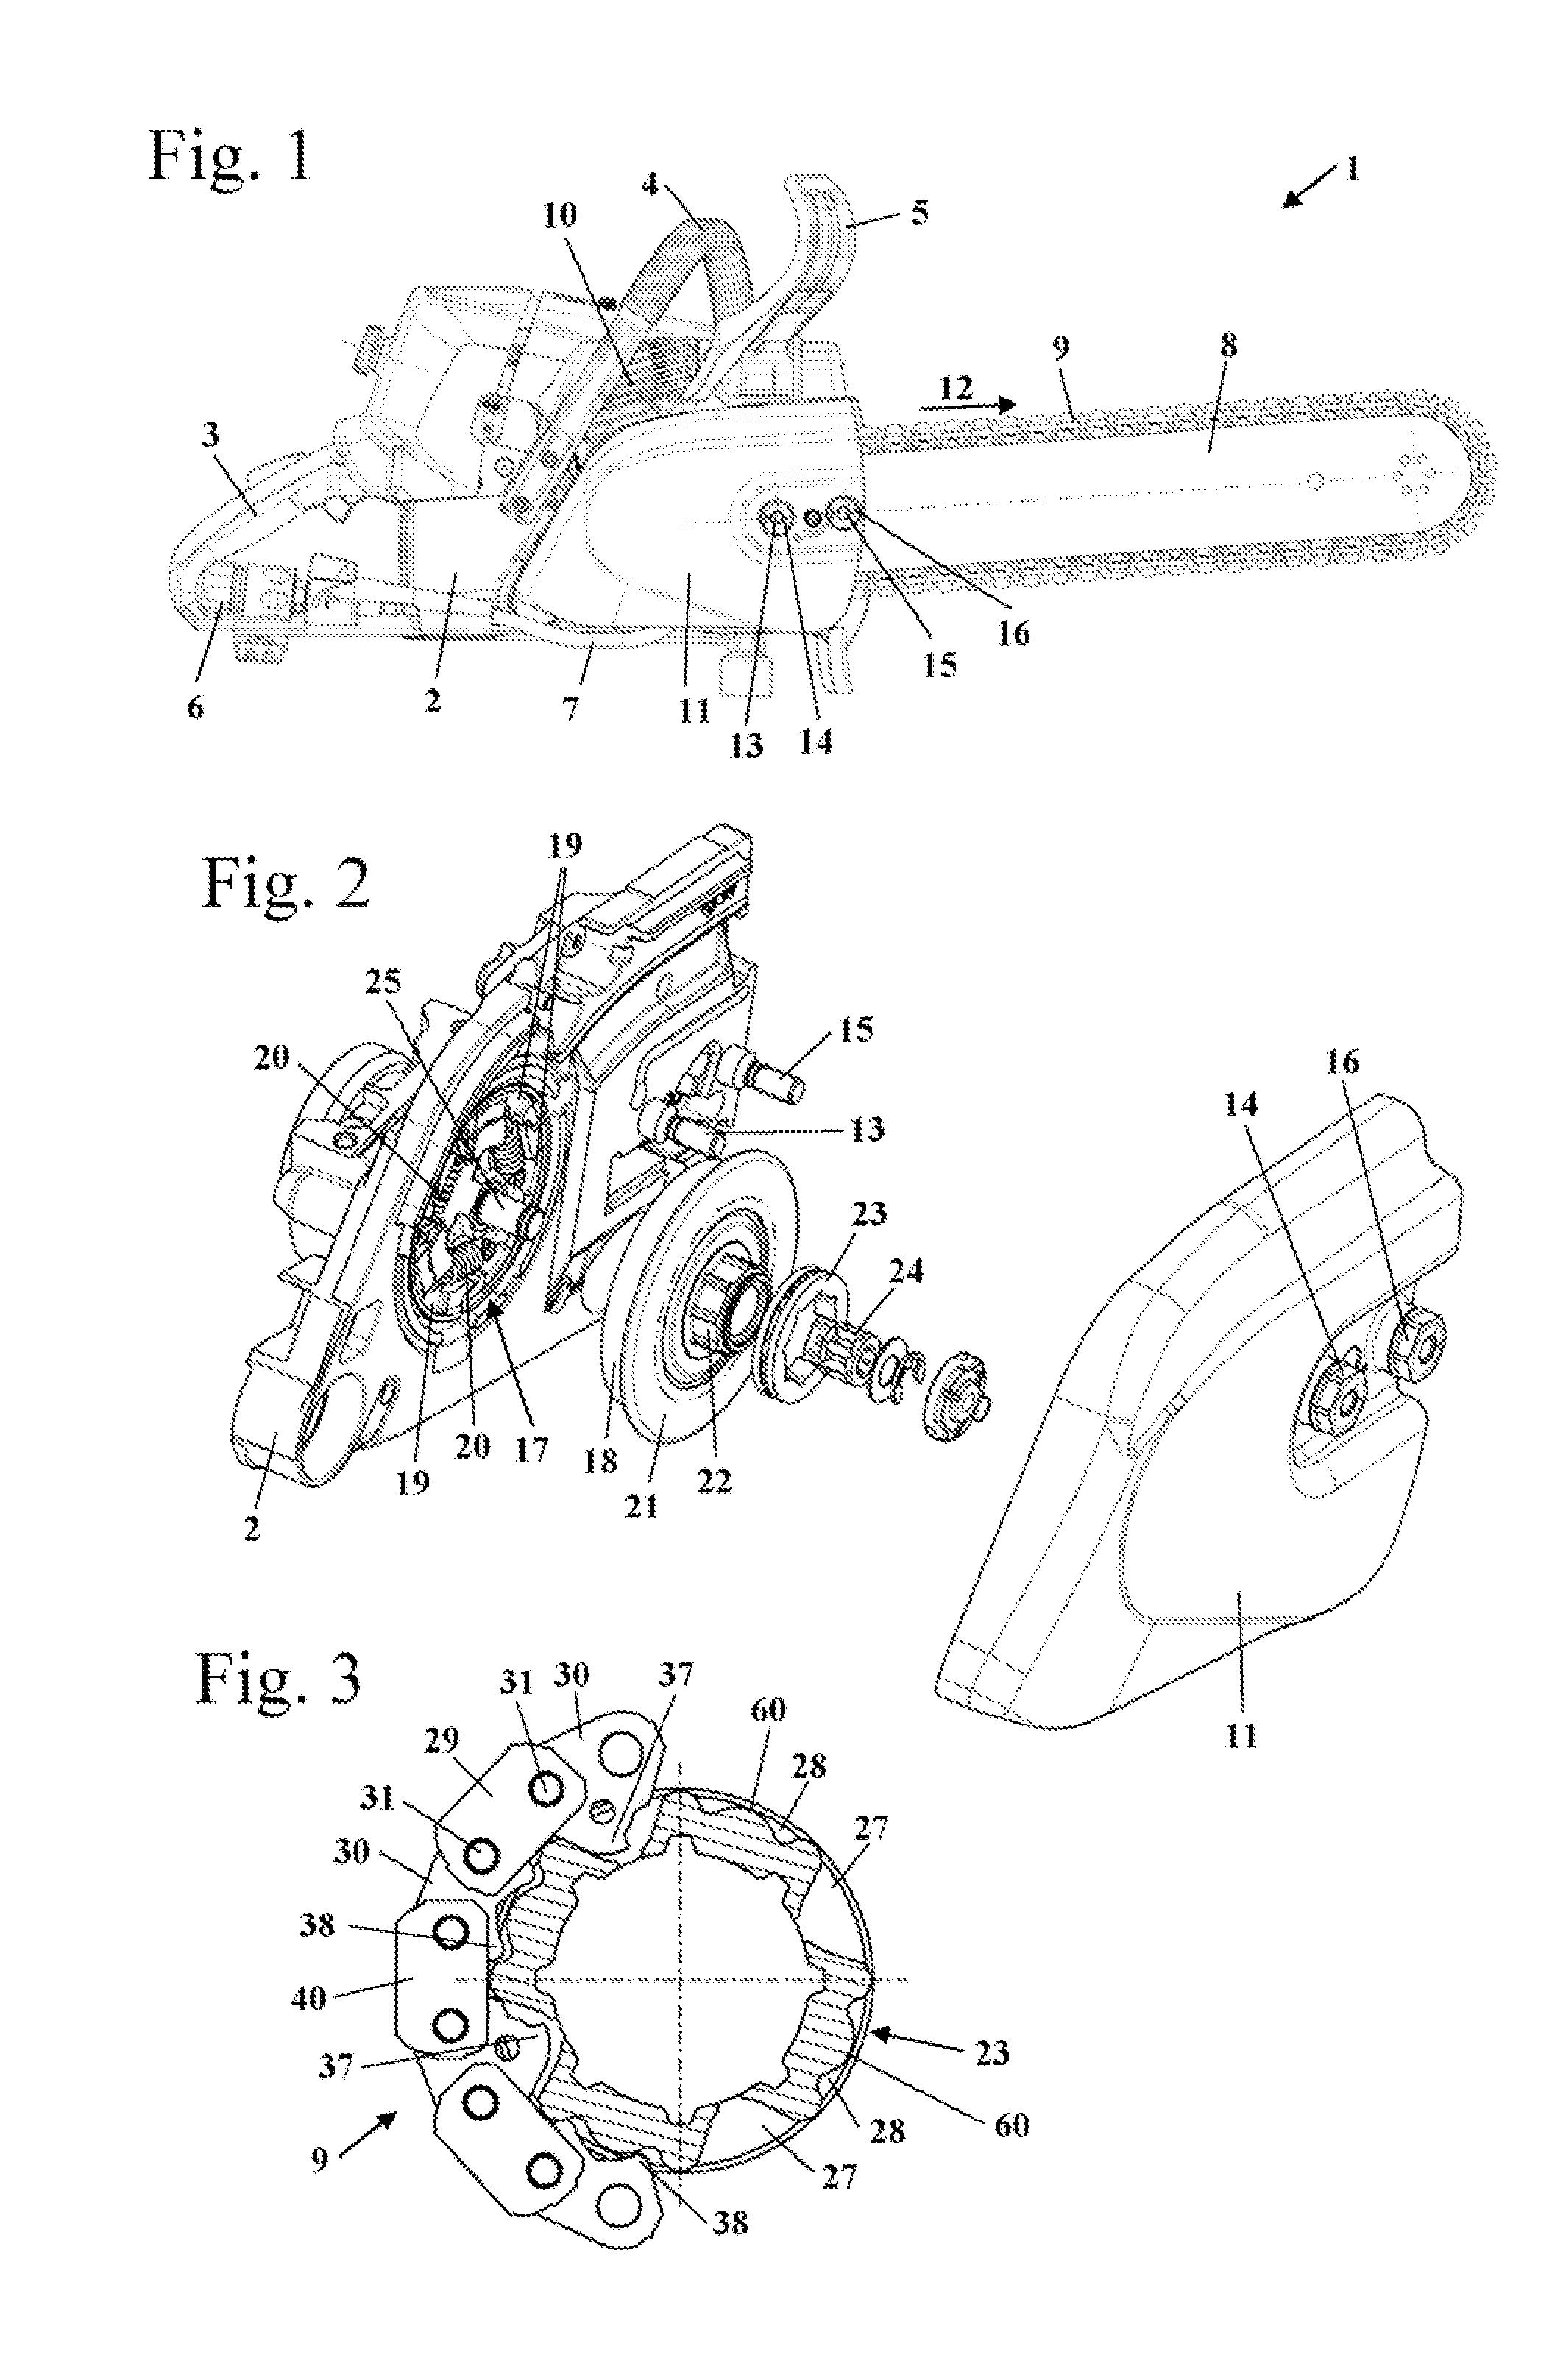 Cutting chain for cutting mineral and metal materials